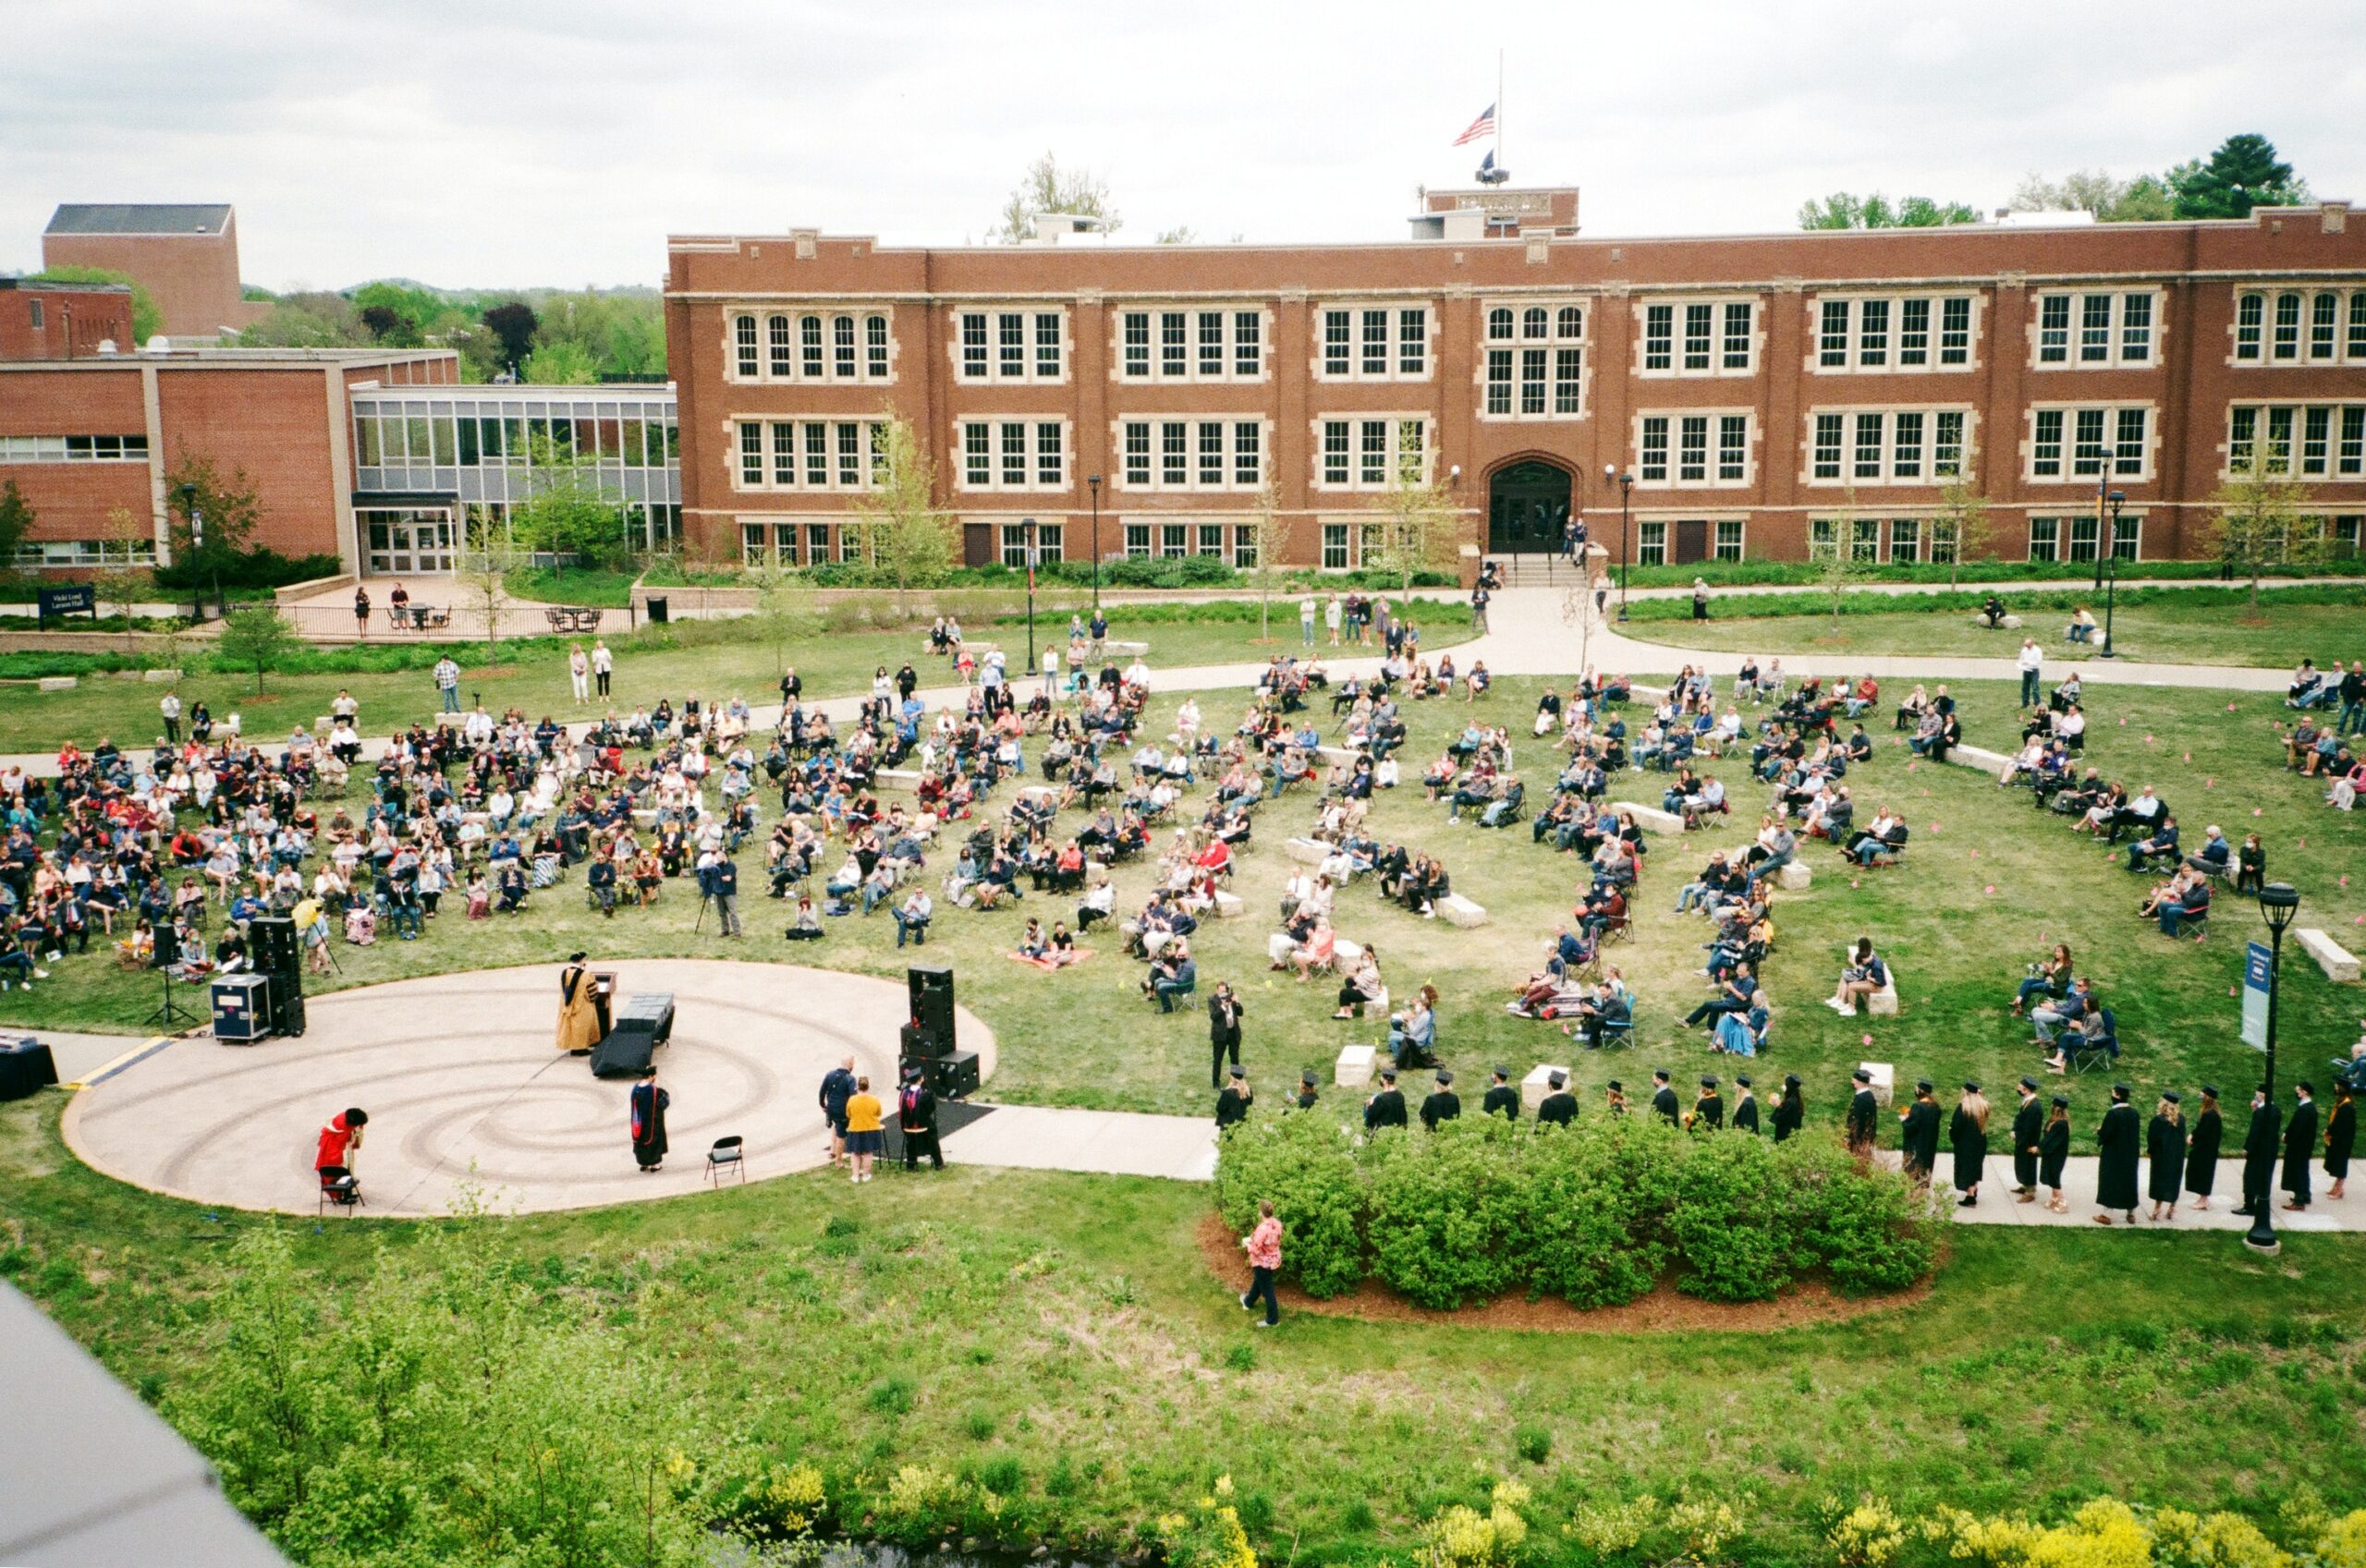 A college graduation ceremony on a grassy campus